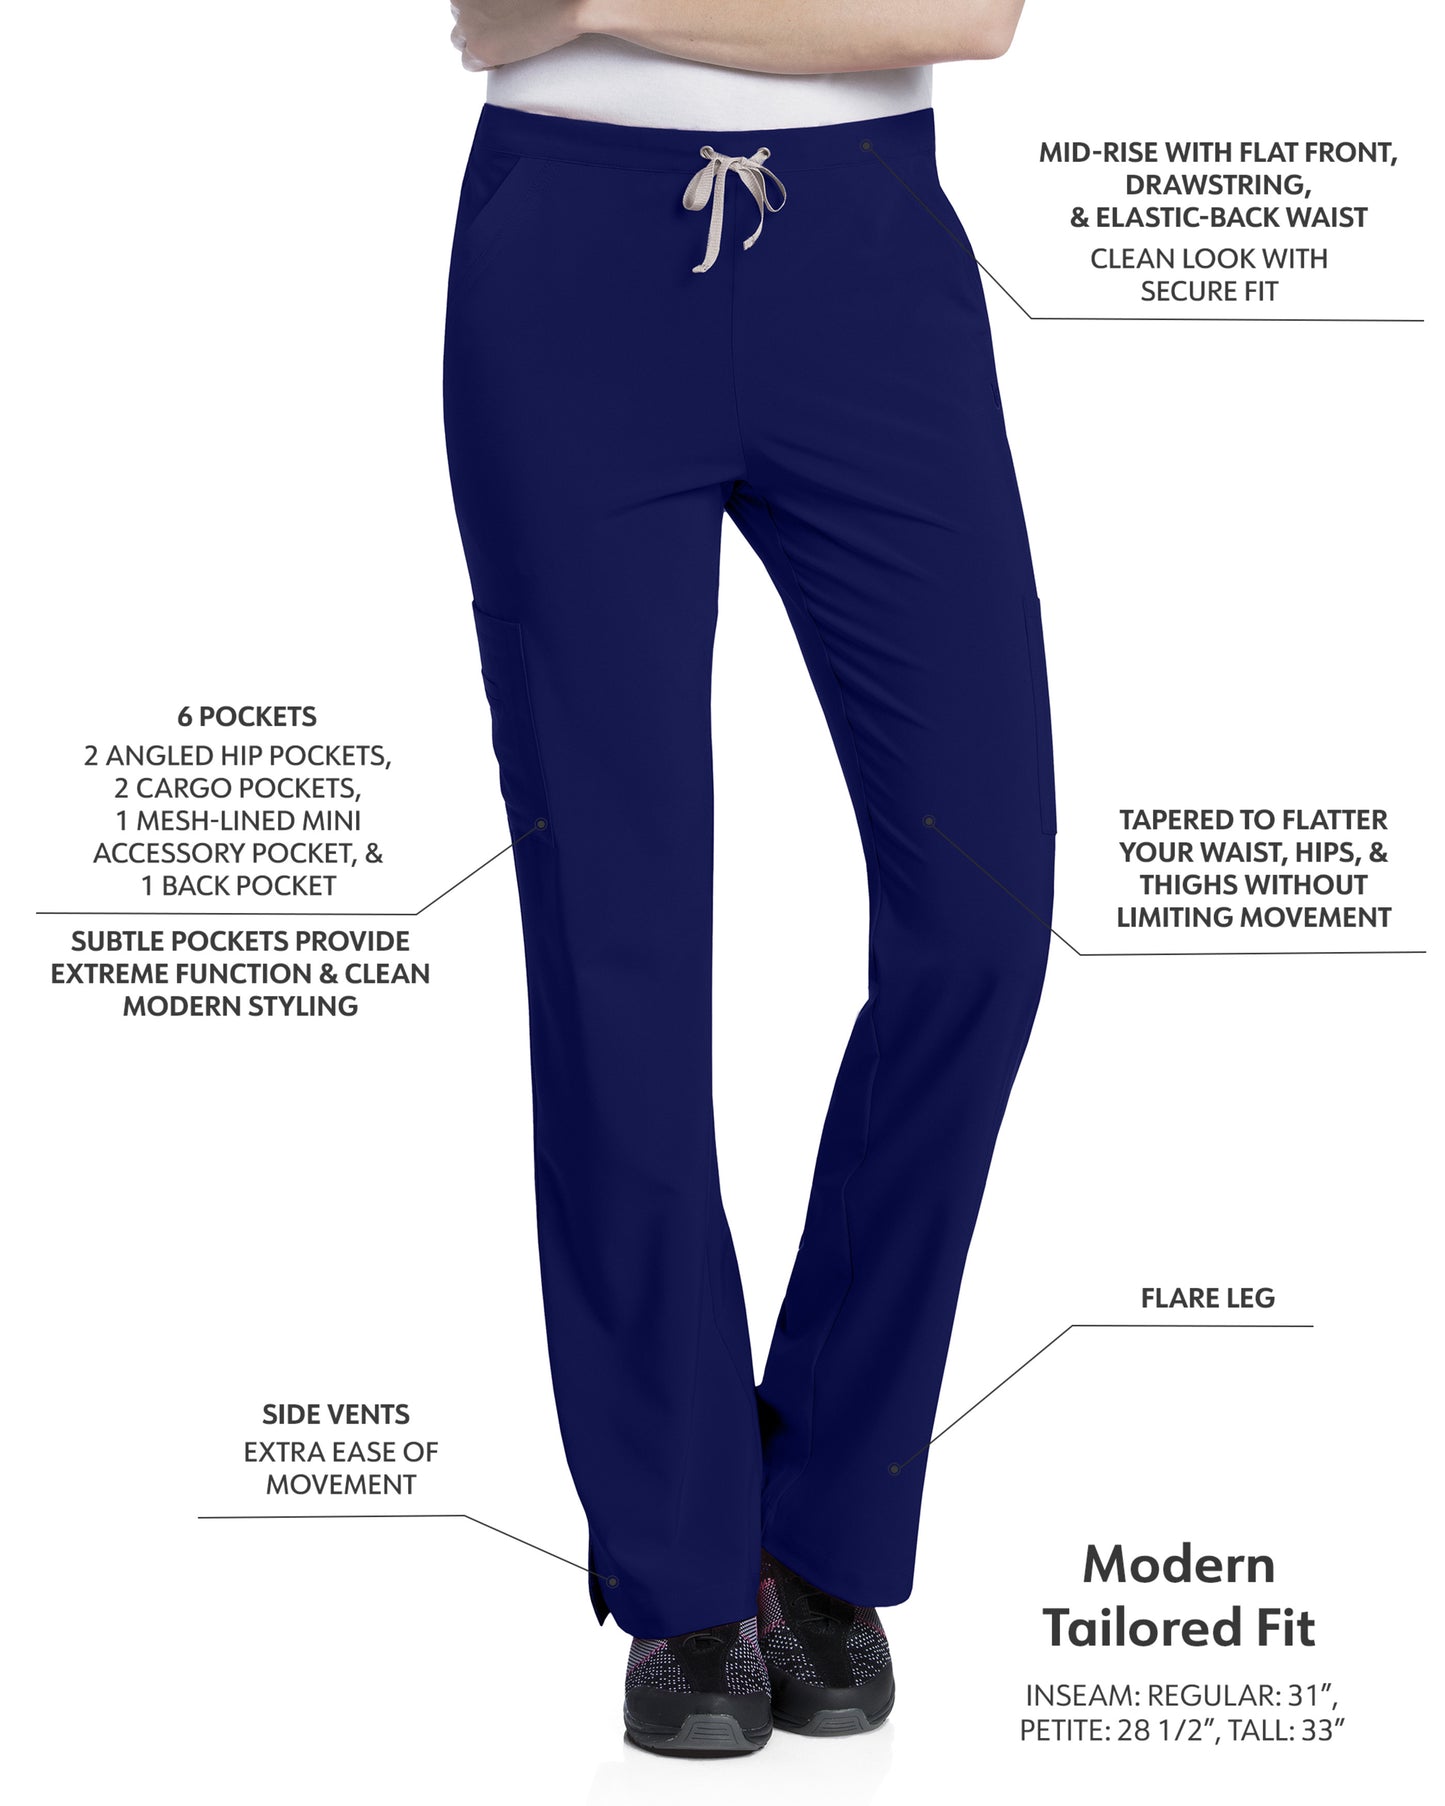 Women's Breathable Fabric Pant - 9312 - True Navy